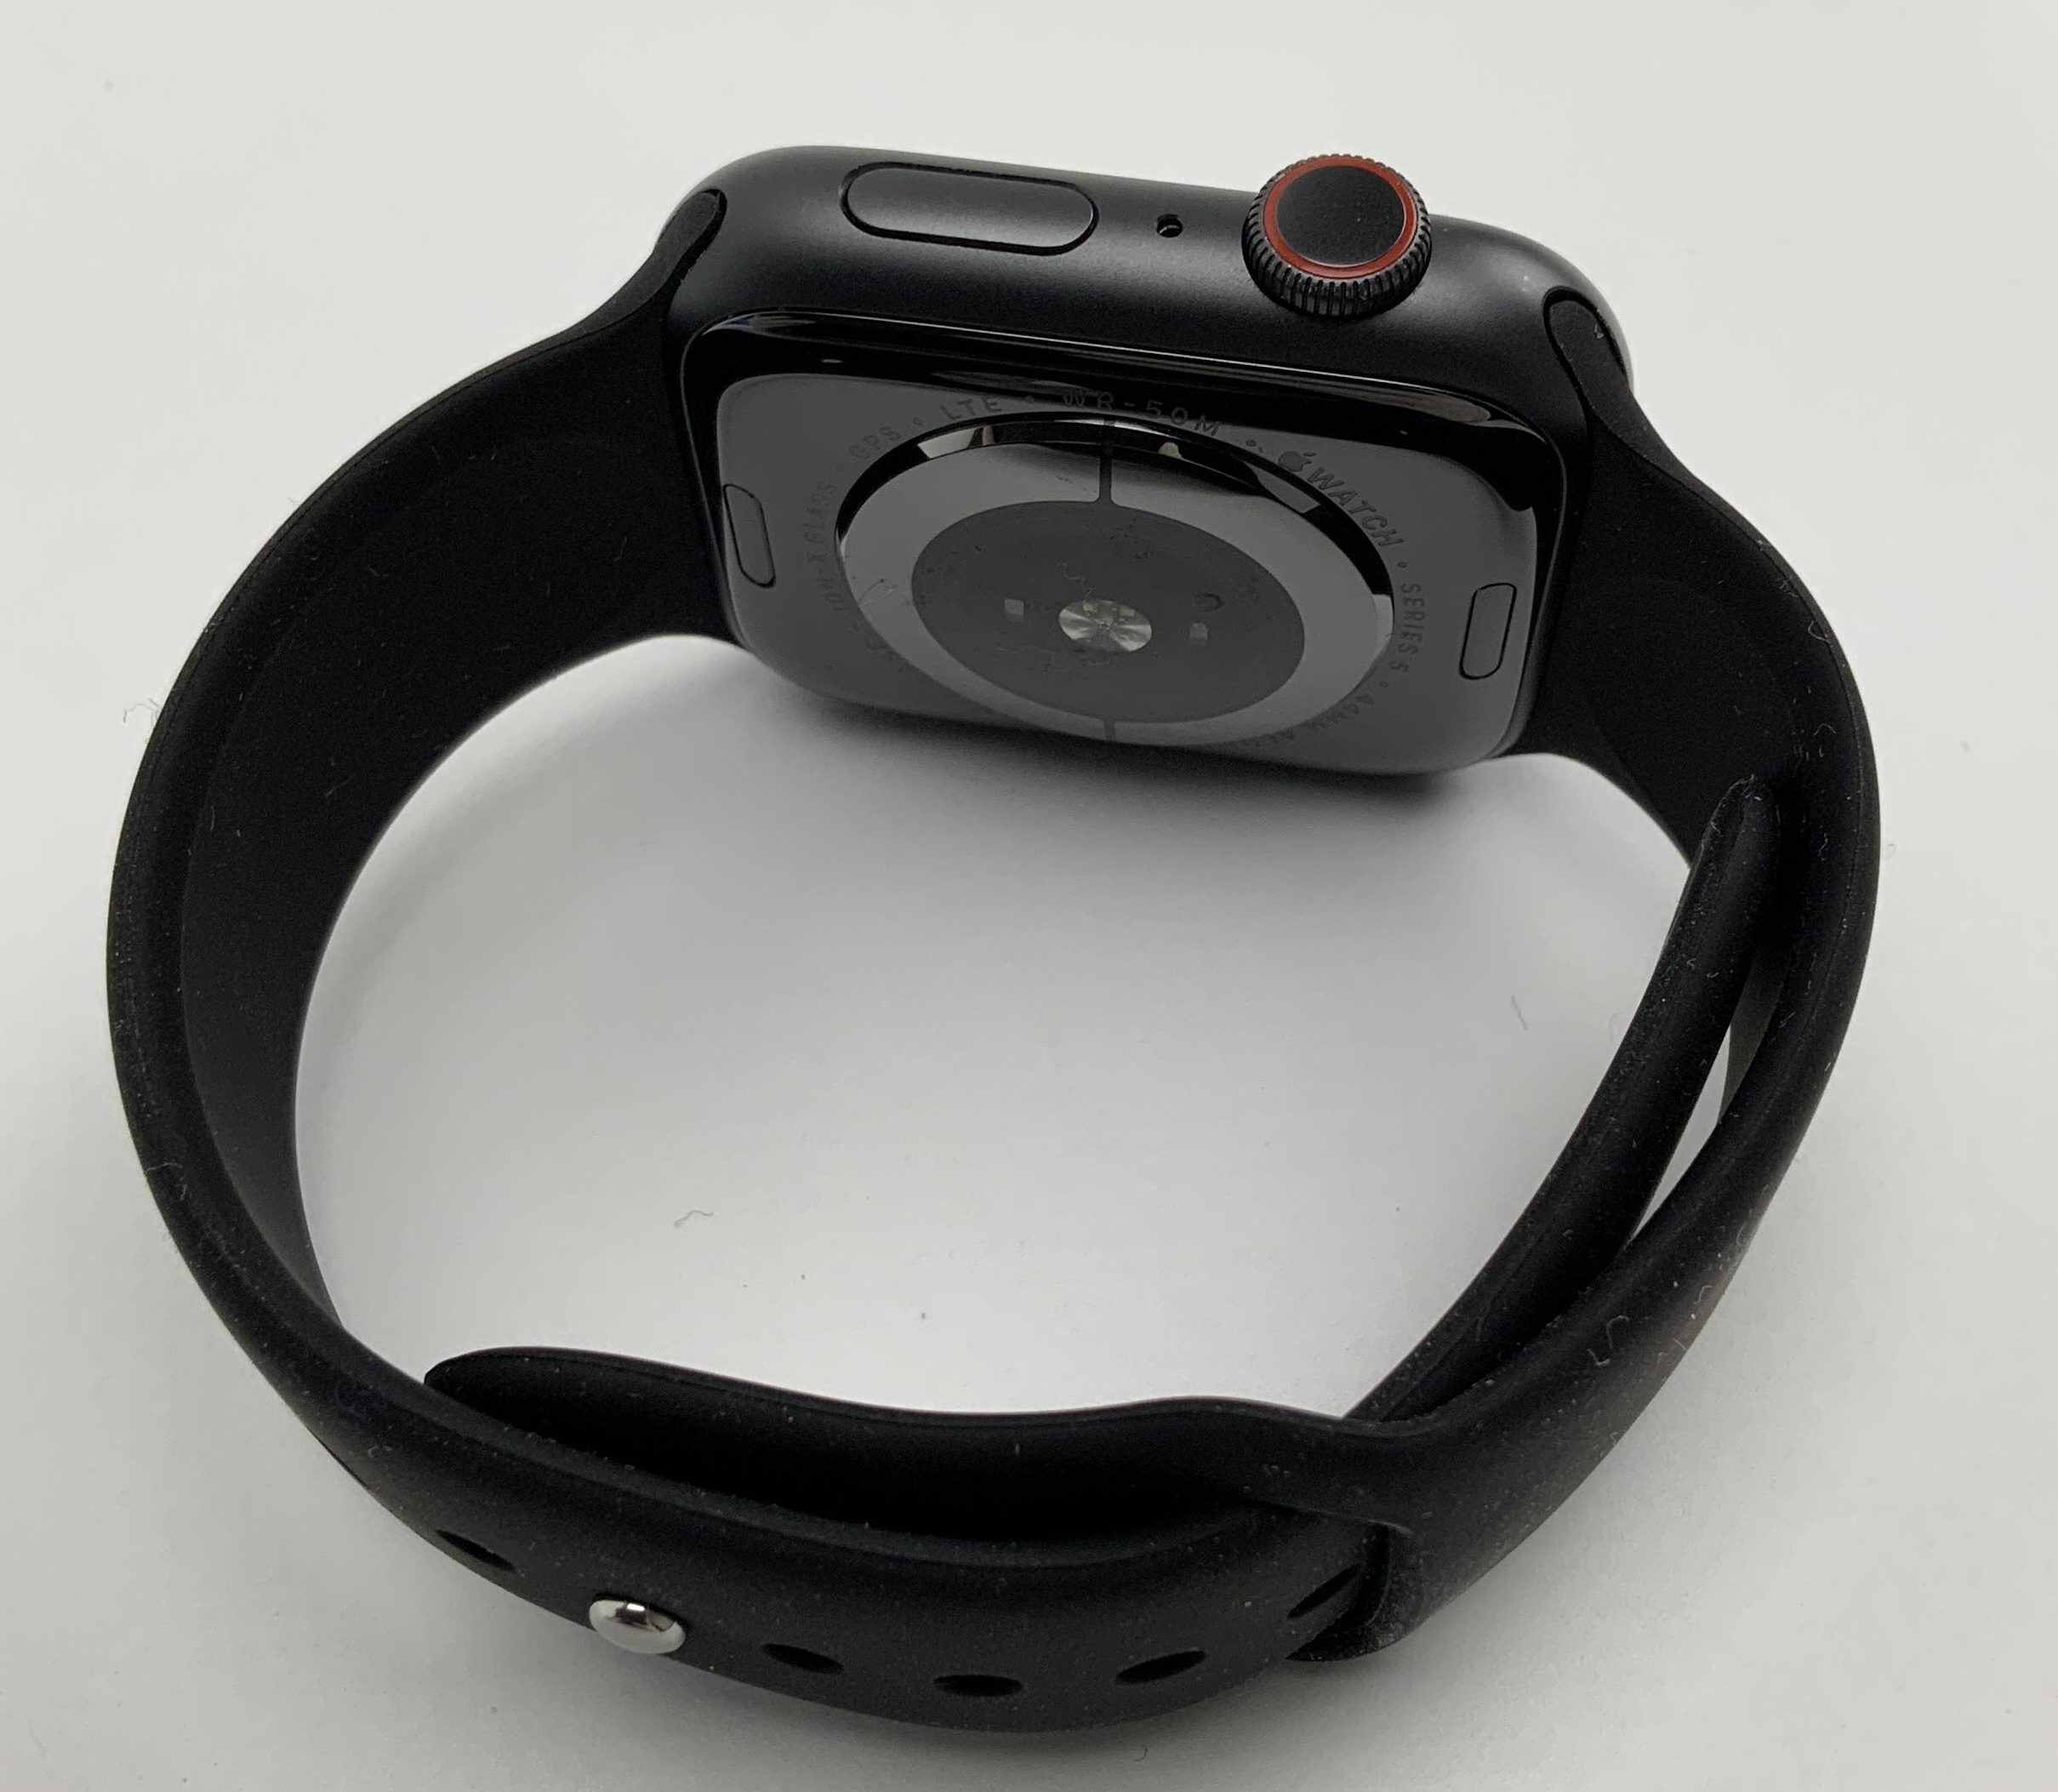 Watch Series 5 Aluminum Cellular (44mm), Space Gray, image 4